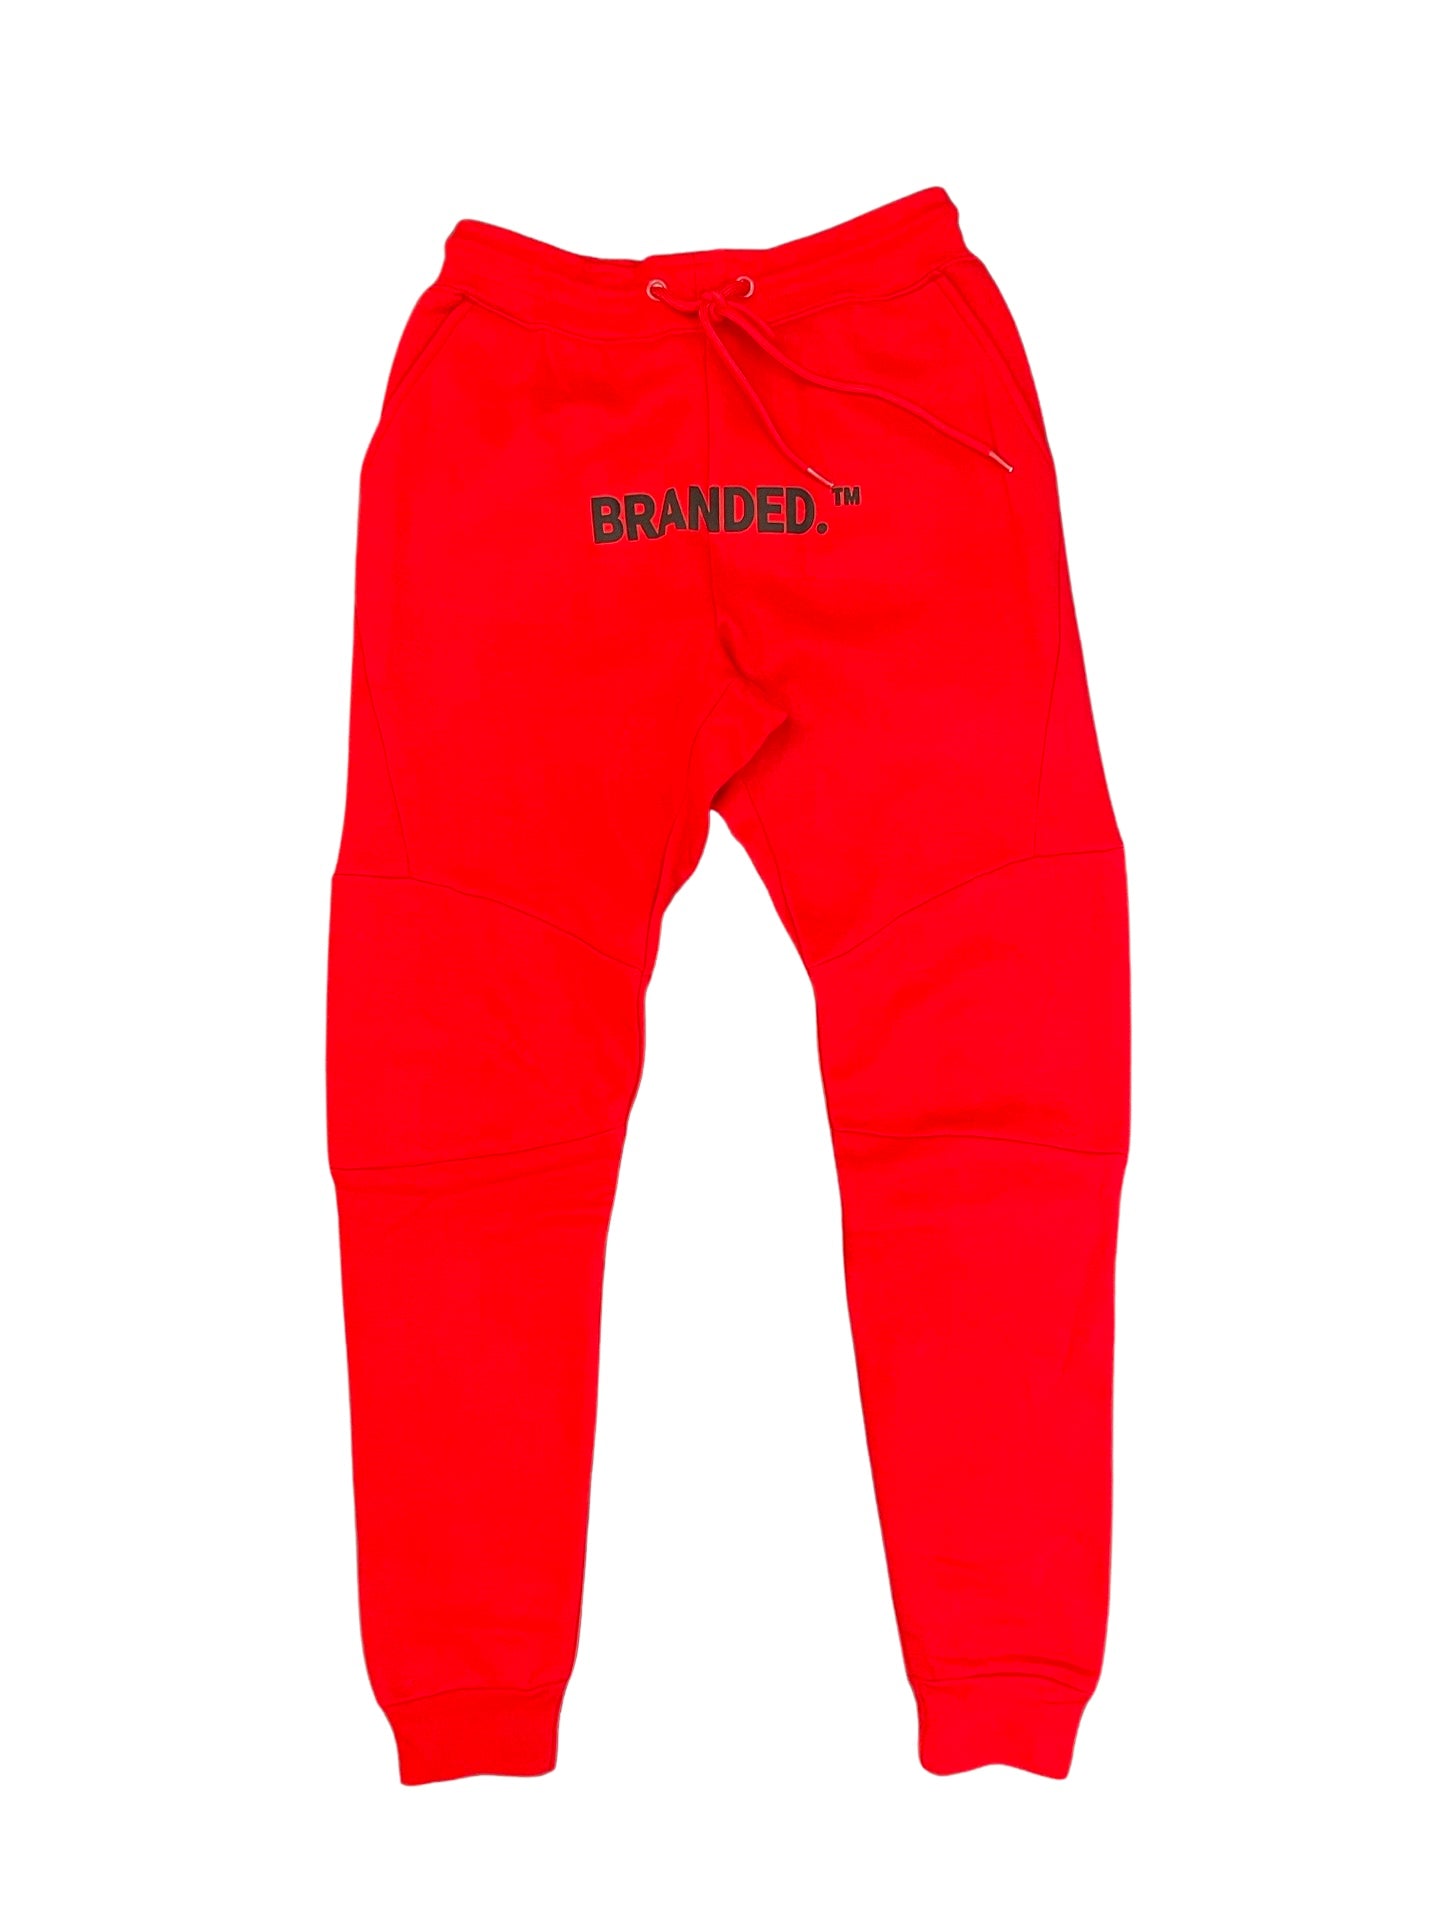 Branded. ™ Set RED (End of Life)